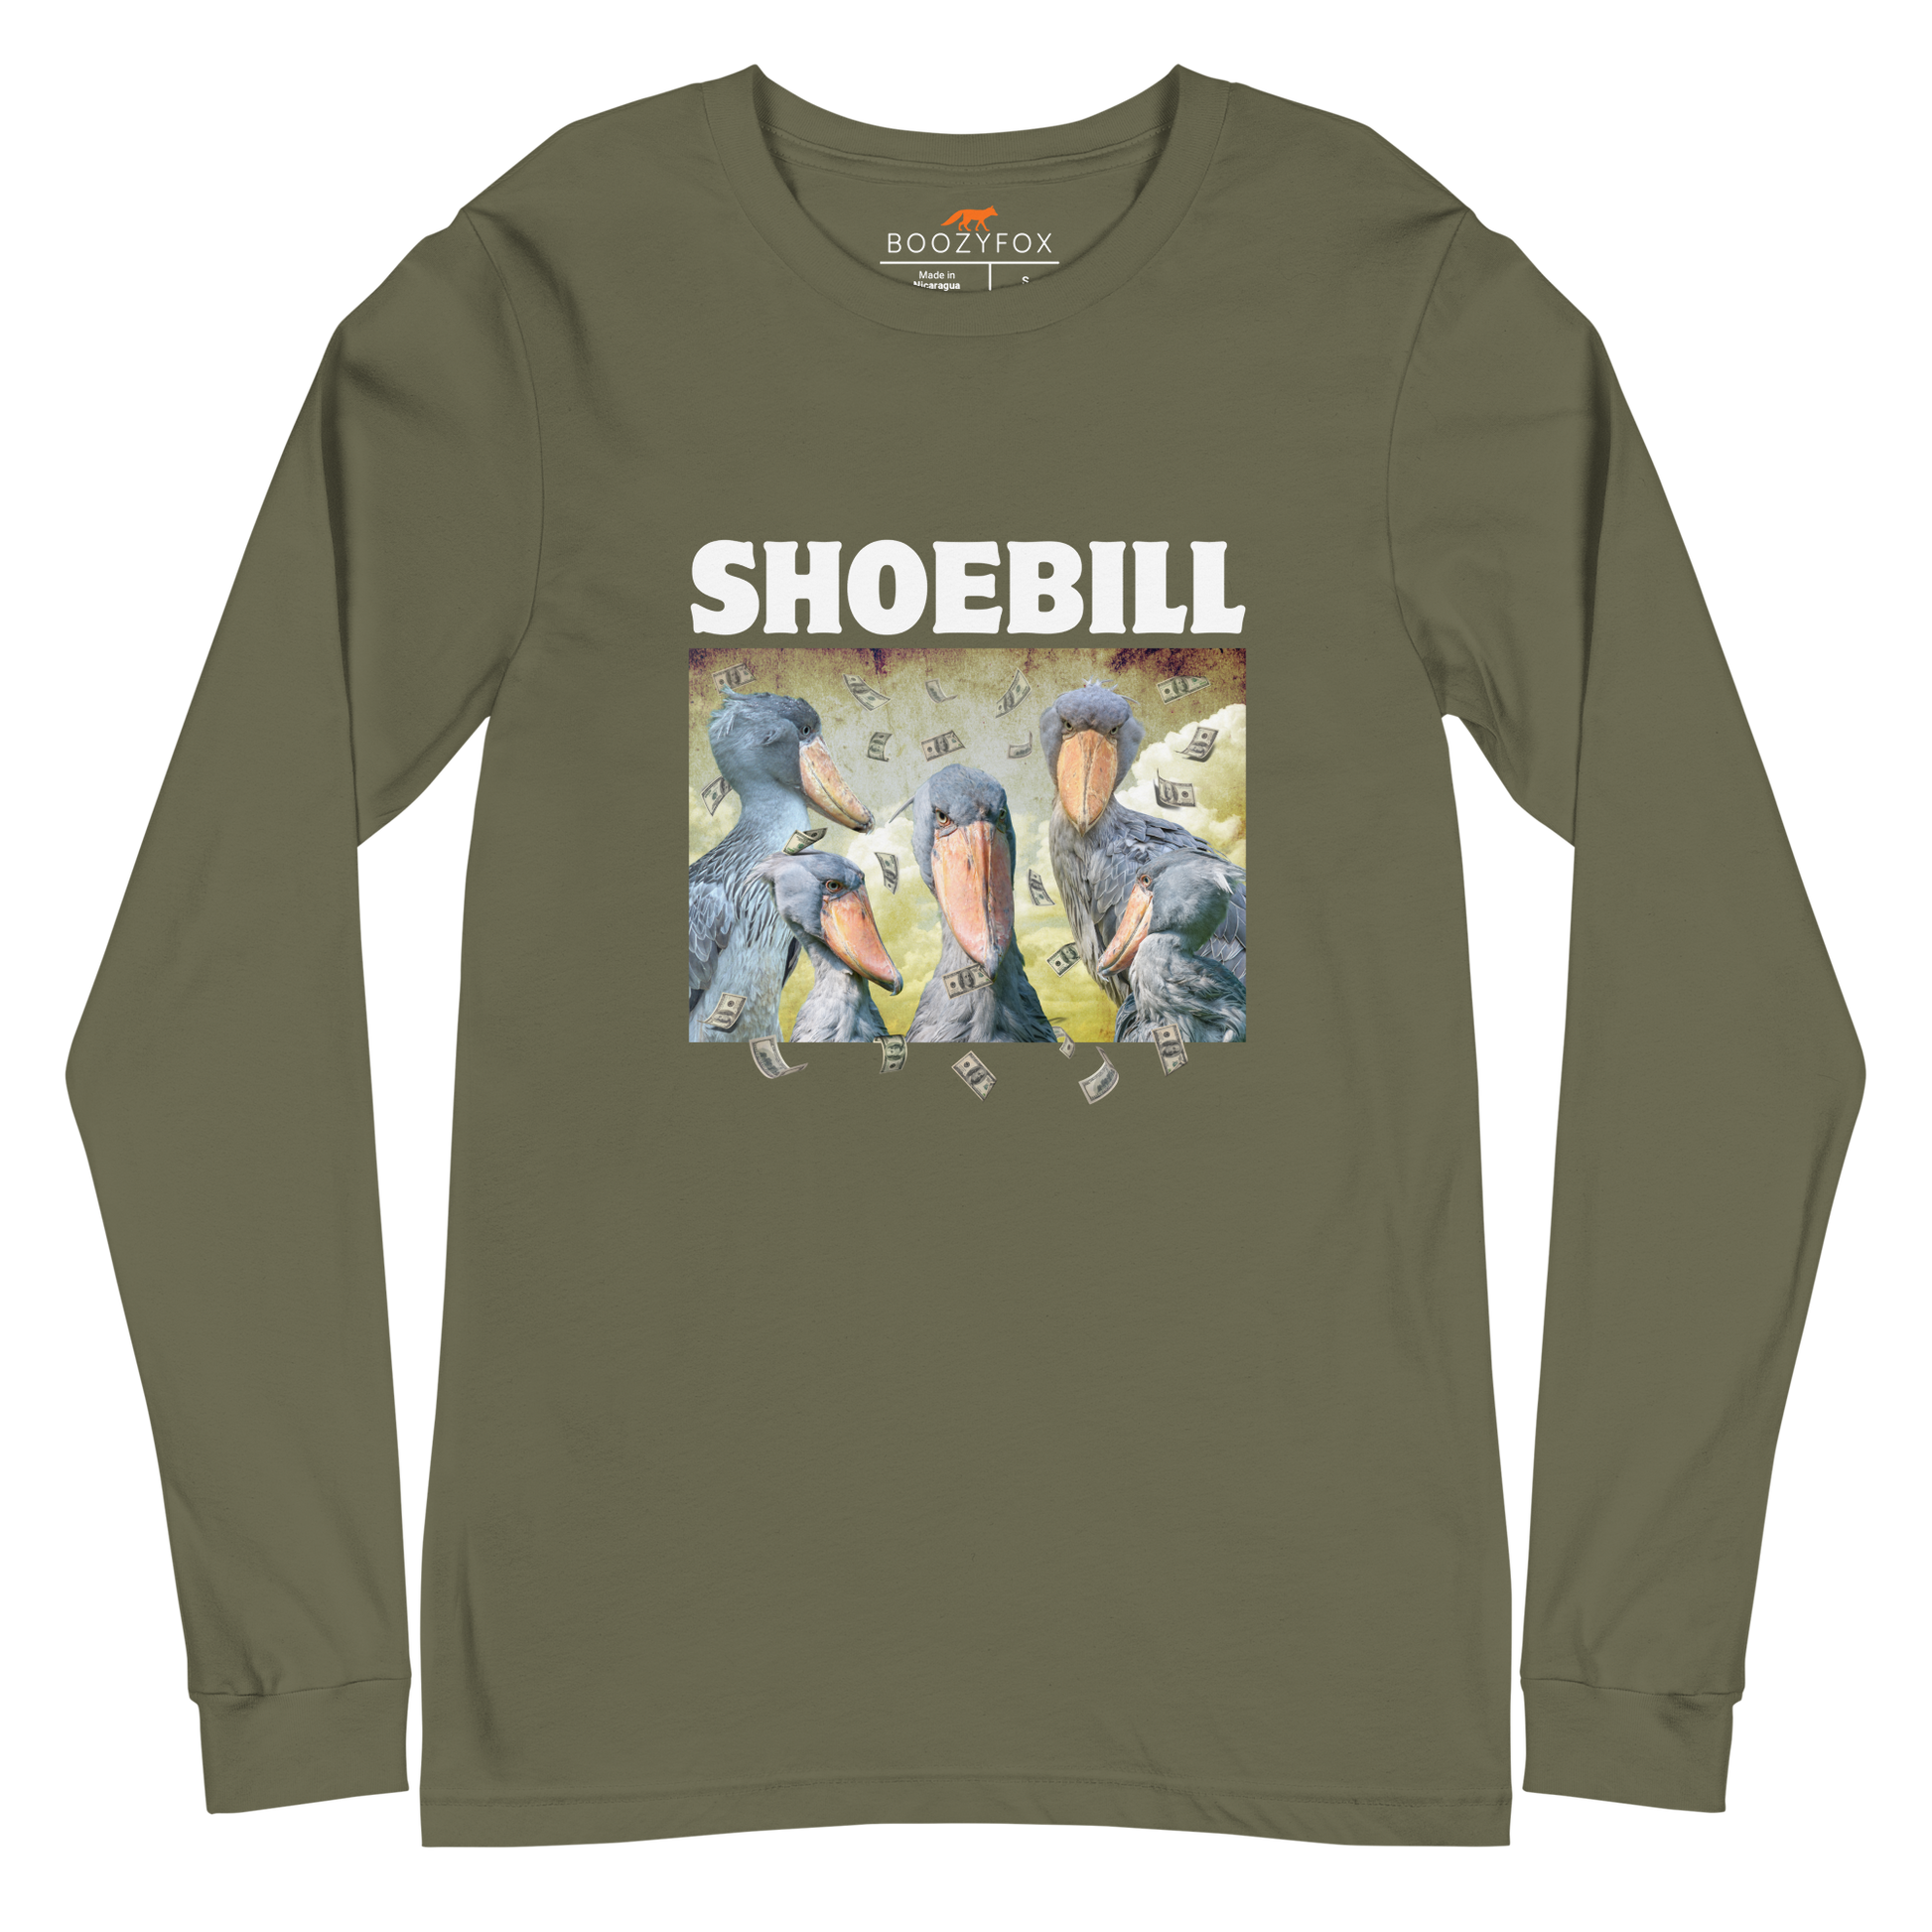 Military Green Shoebill Stork Long Sleeve Tee featuring cool Shoebill graphic on the chest - Artsy/Funny Shoebill Stork Long Sleeve Graphic Tees - Boozy Fox